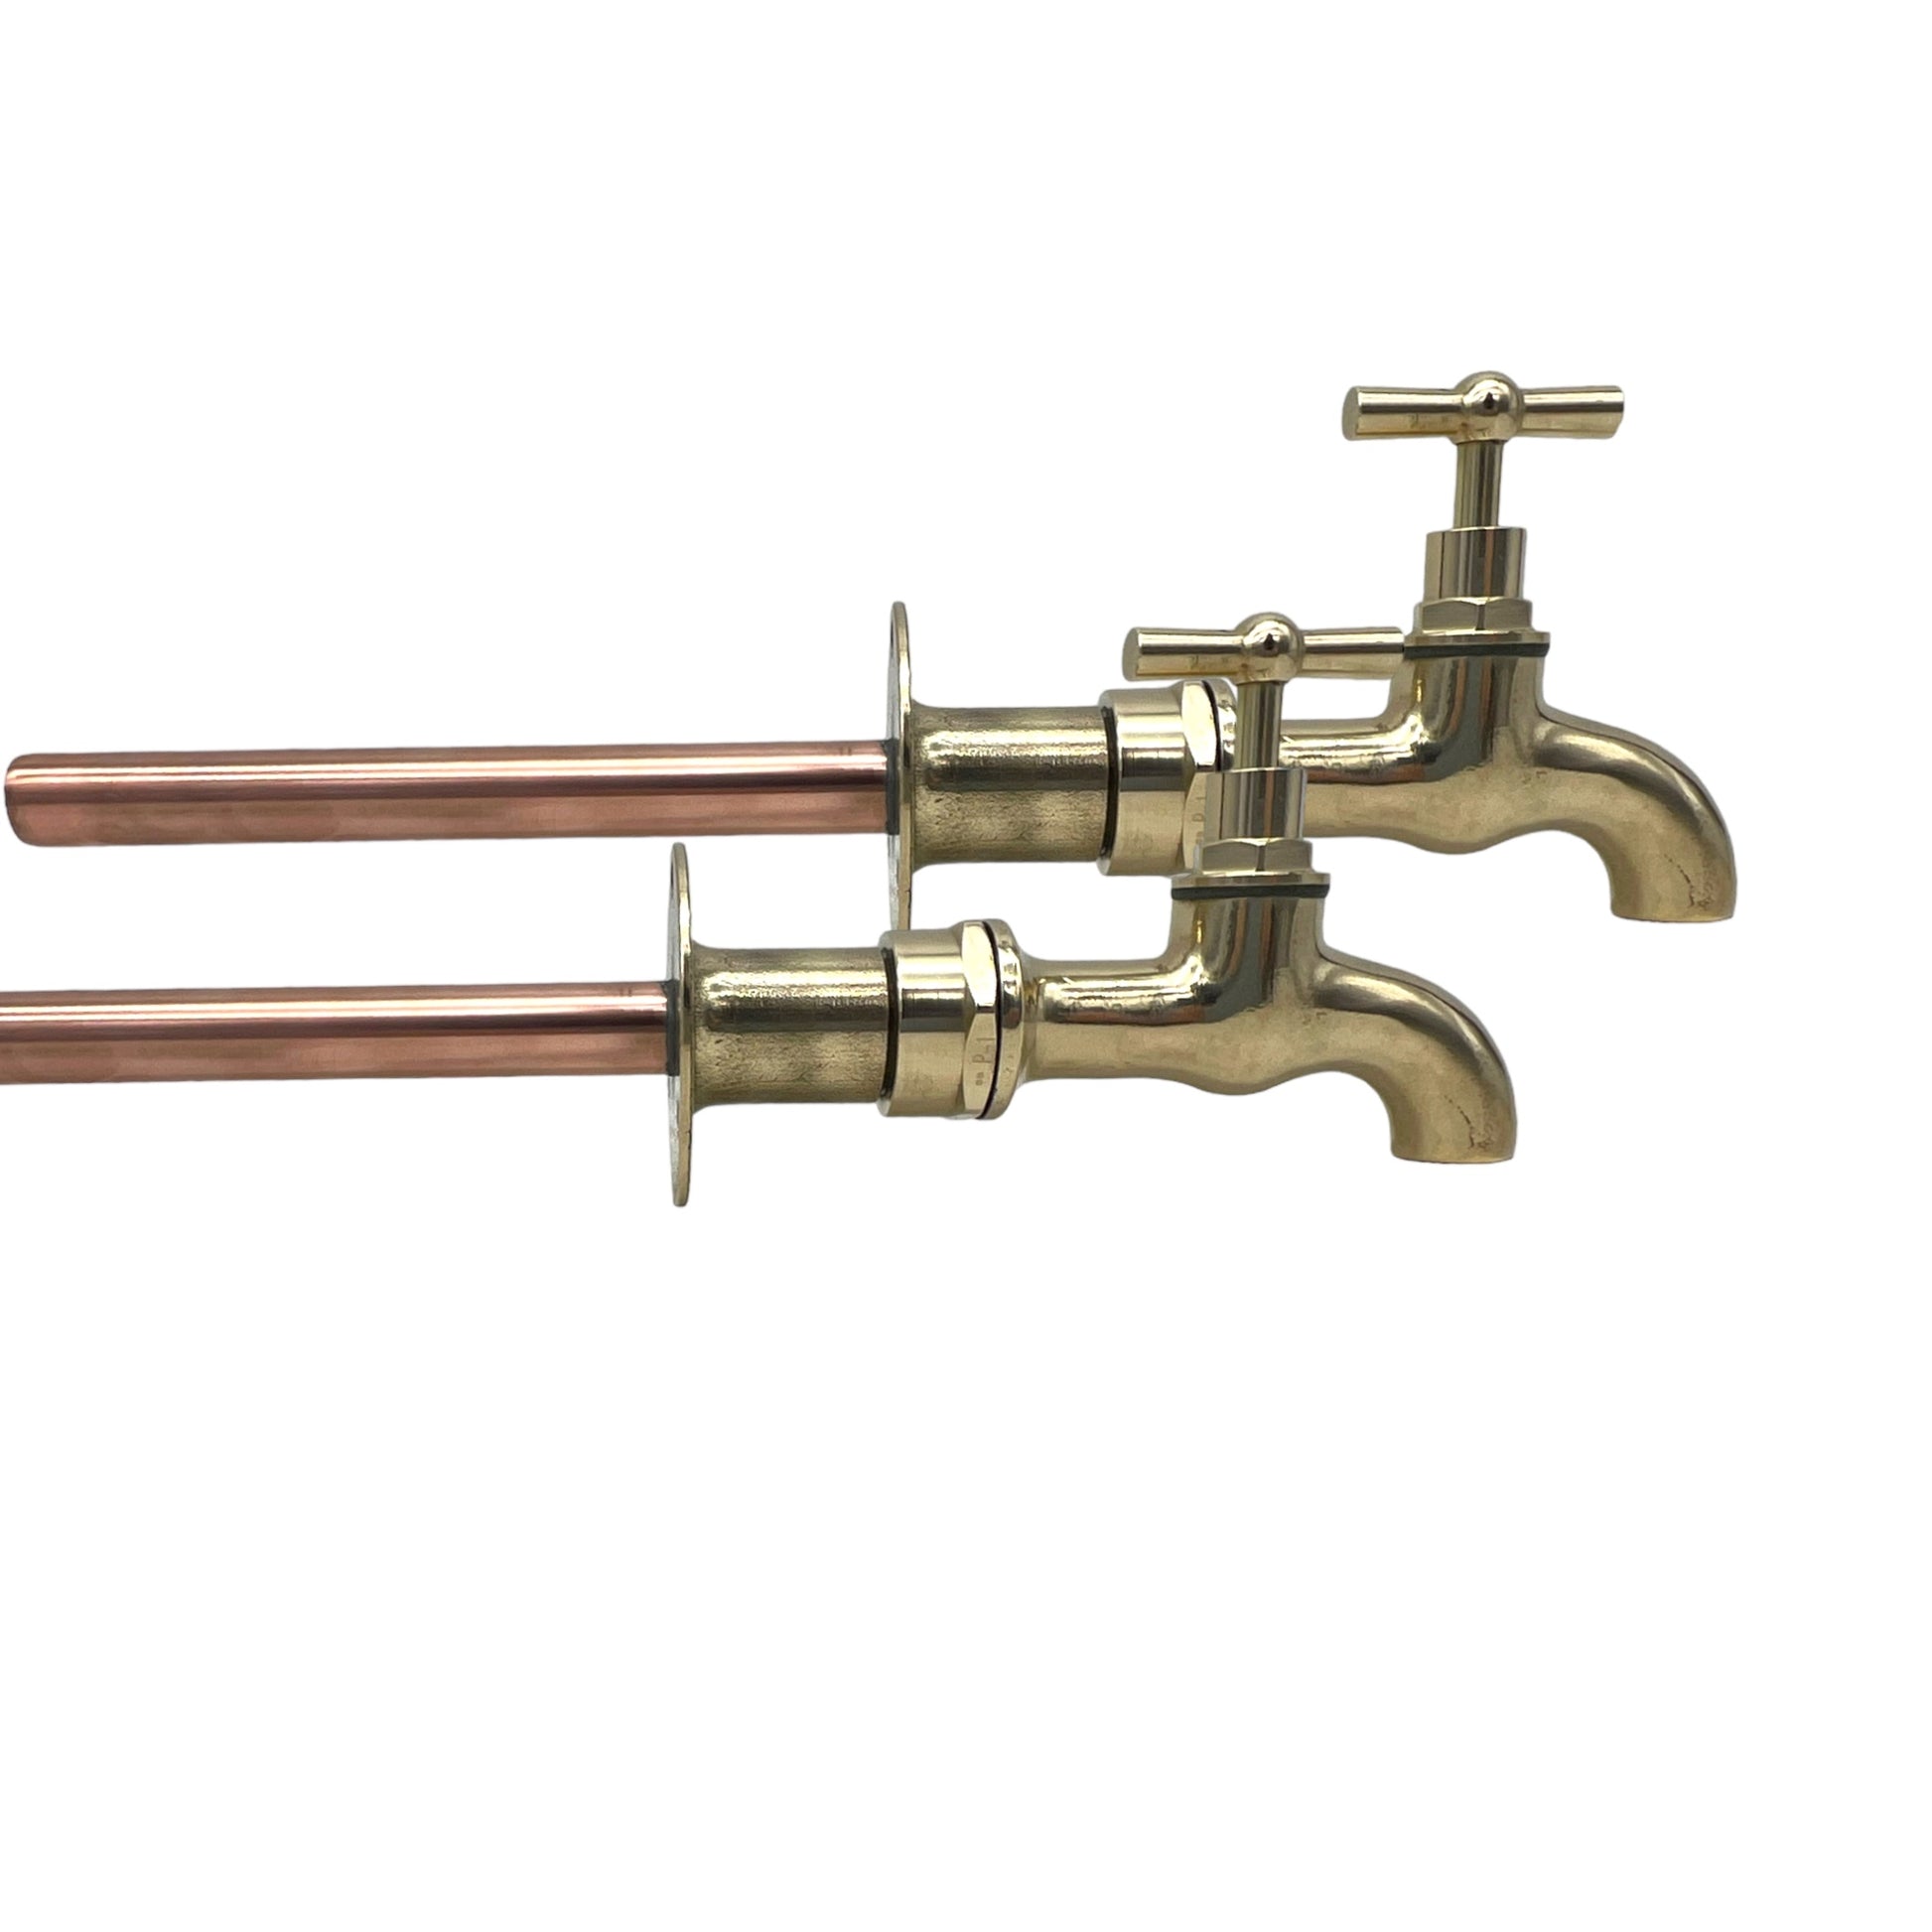 Solid brass wall mounted kitchen or bathroom taps sold by All Things French Store